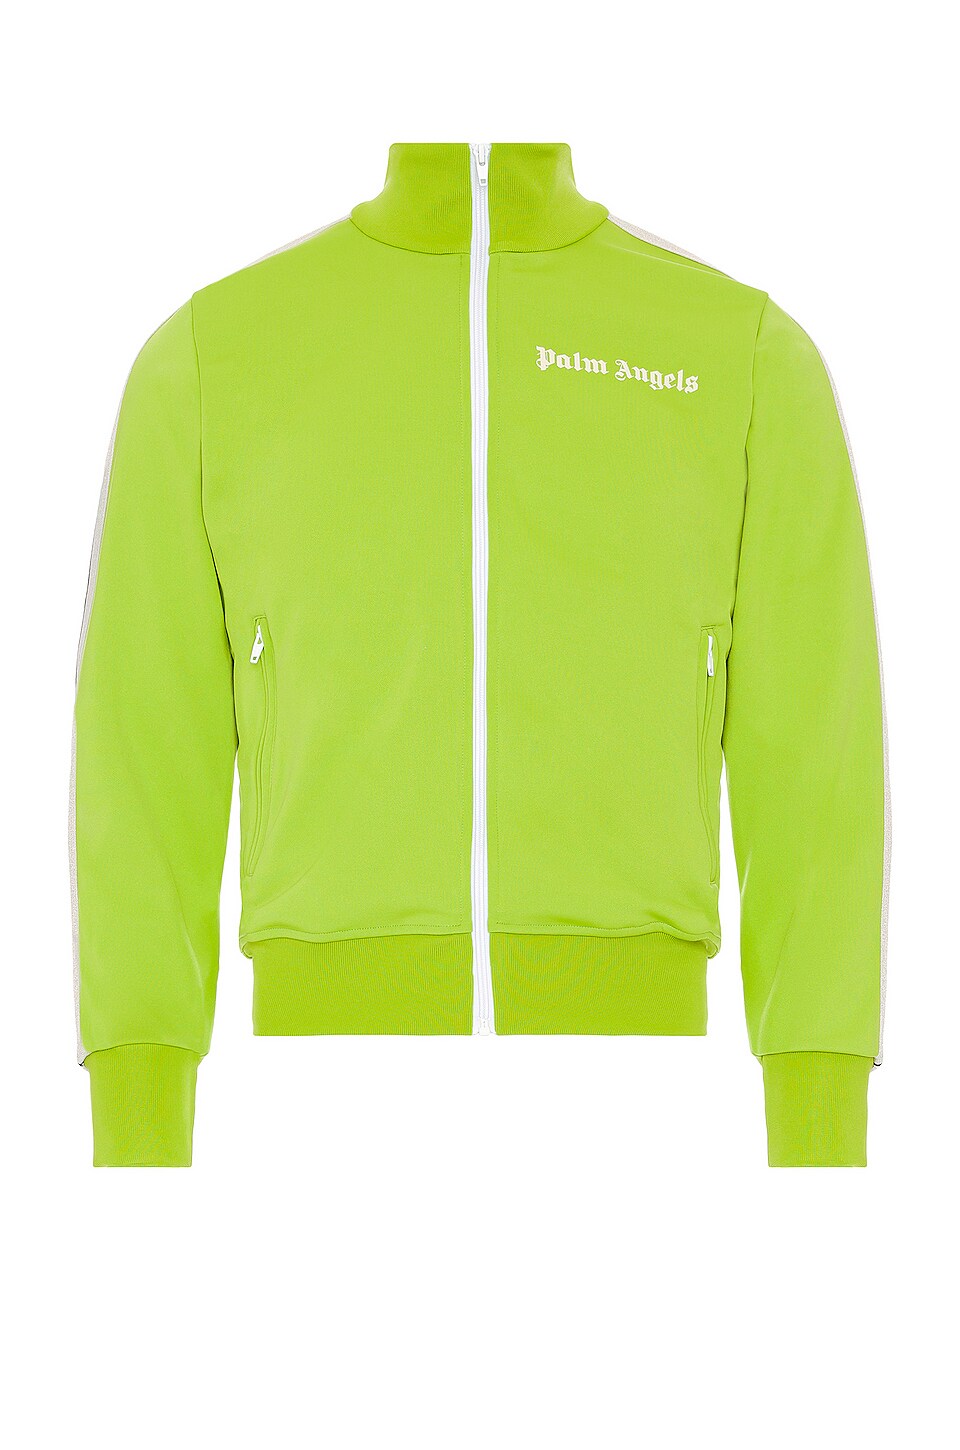 Palm Angels Classic Track Jacket in Lime Green | REVOLVE